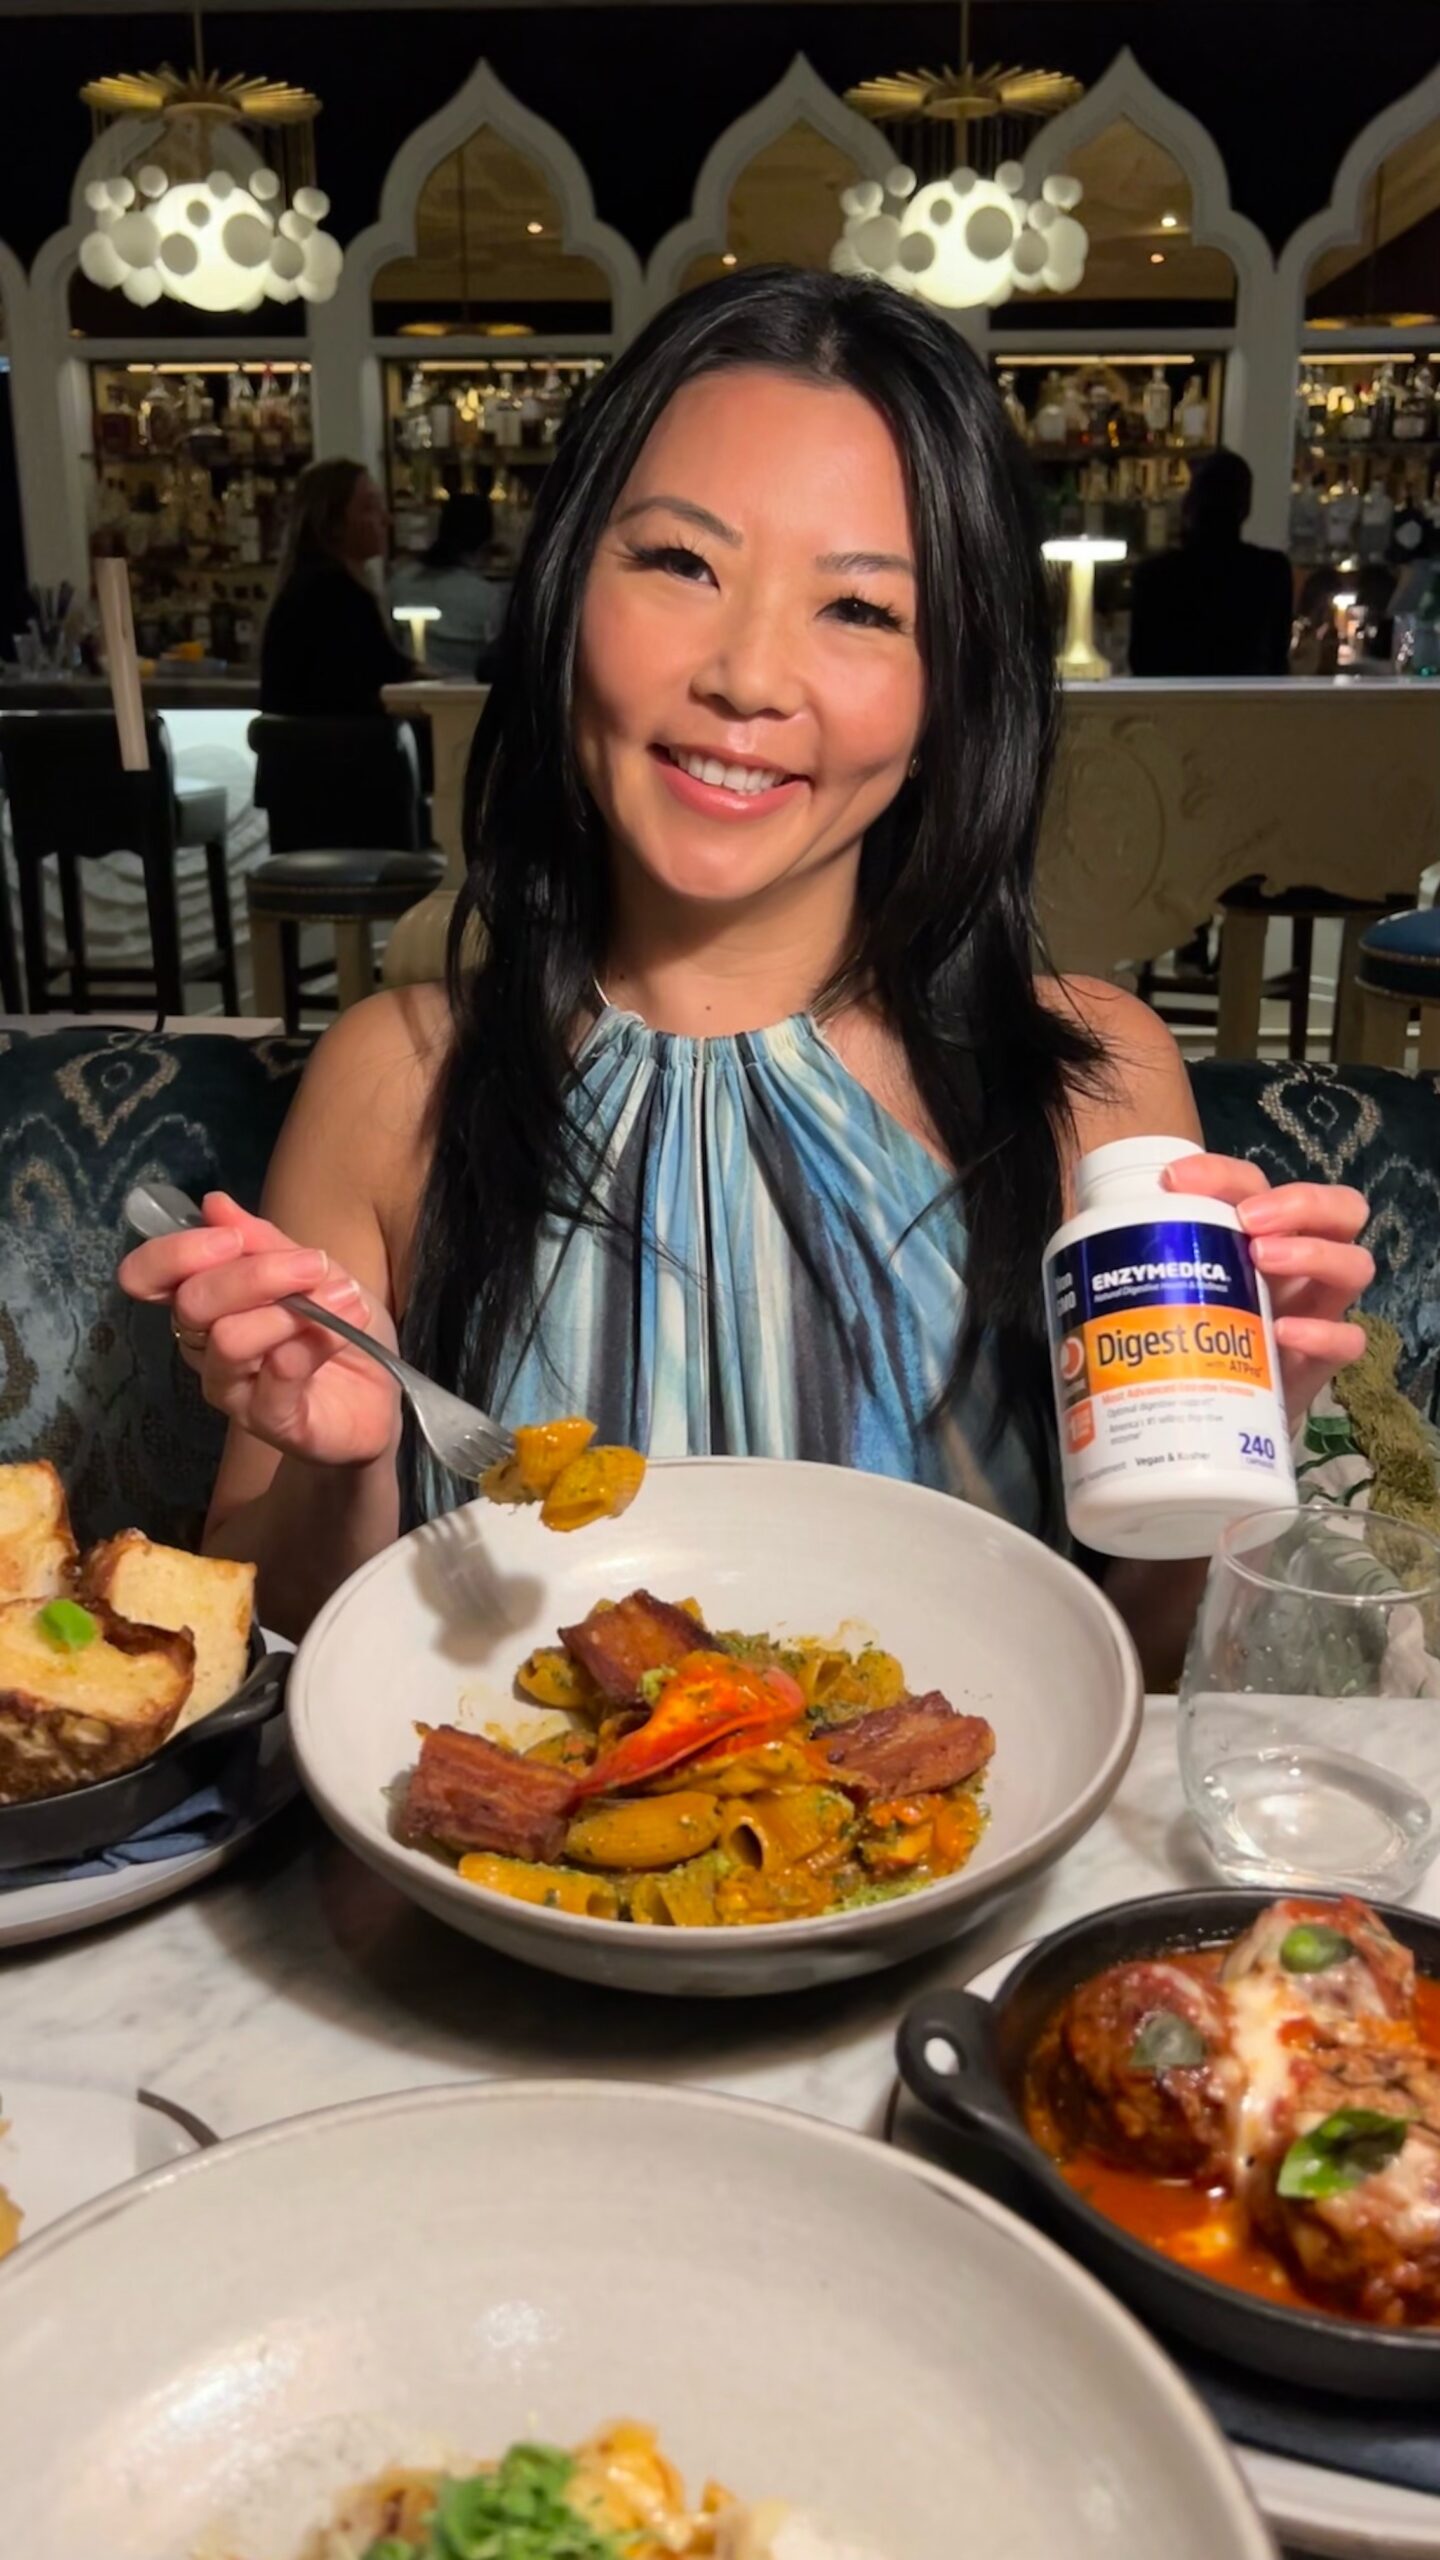 Travel and Food Blogger Tinger Hseih holding a bottle of Enzymedica Digest Gold while eating at an Italian restaurant